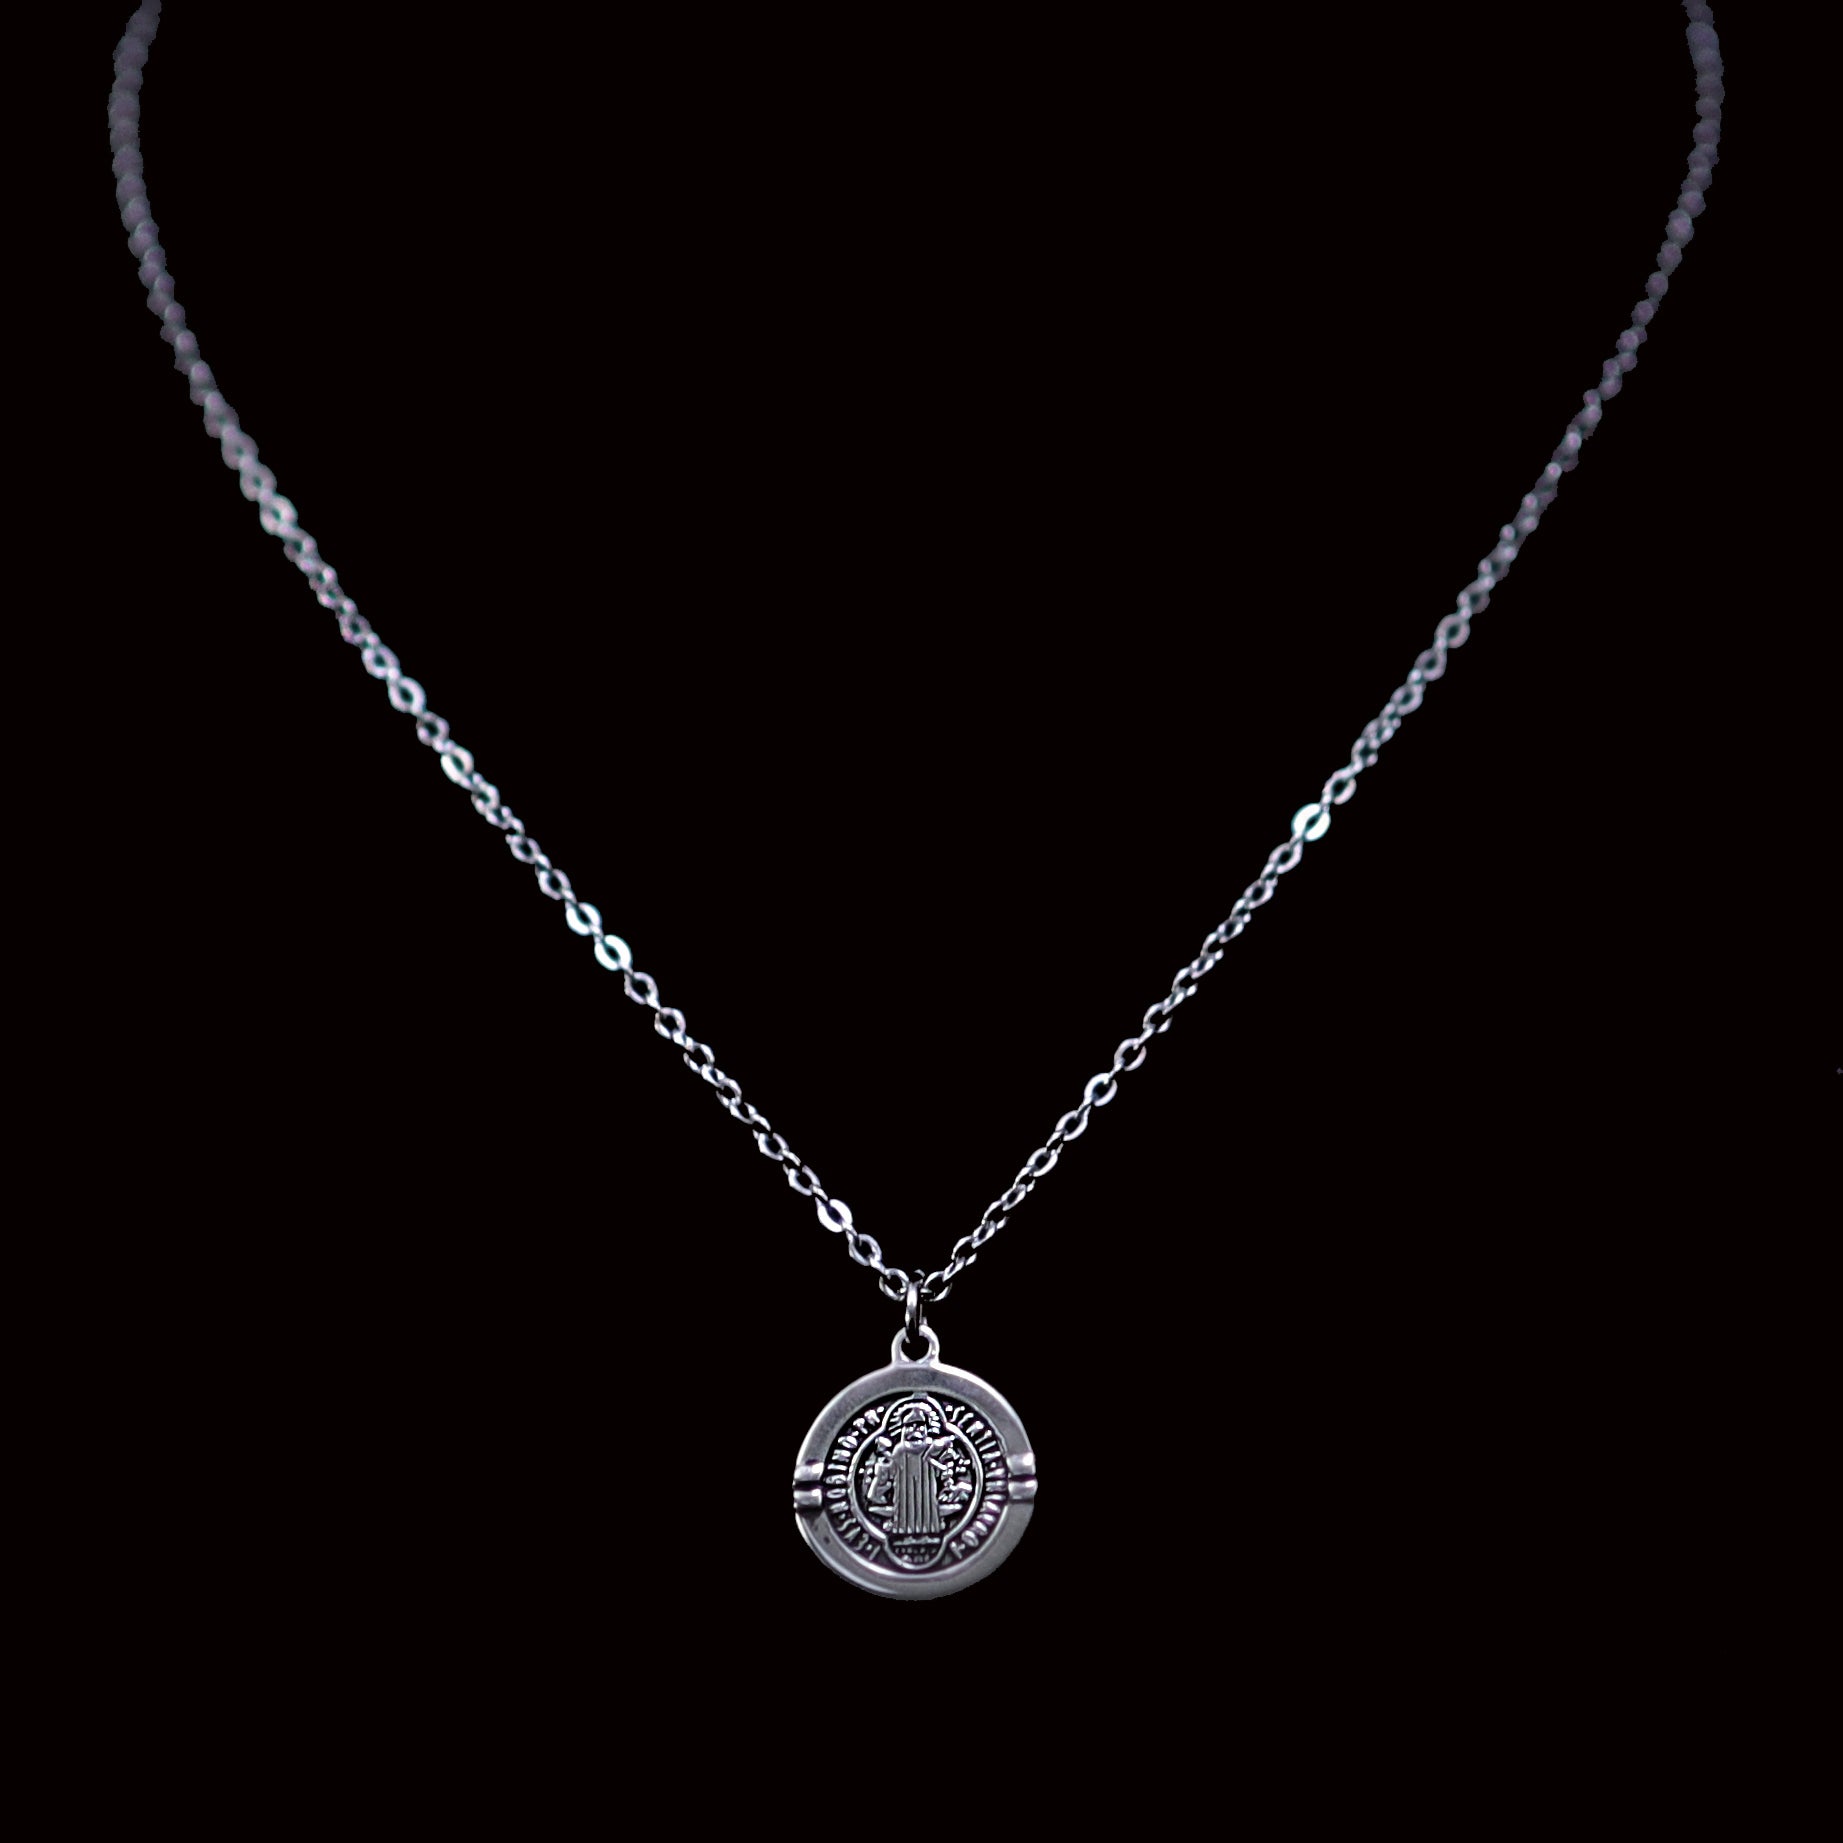 Erazino Stainless Steel Chain Necklace with St Benedict Medallion Pendant